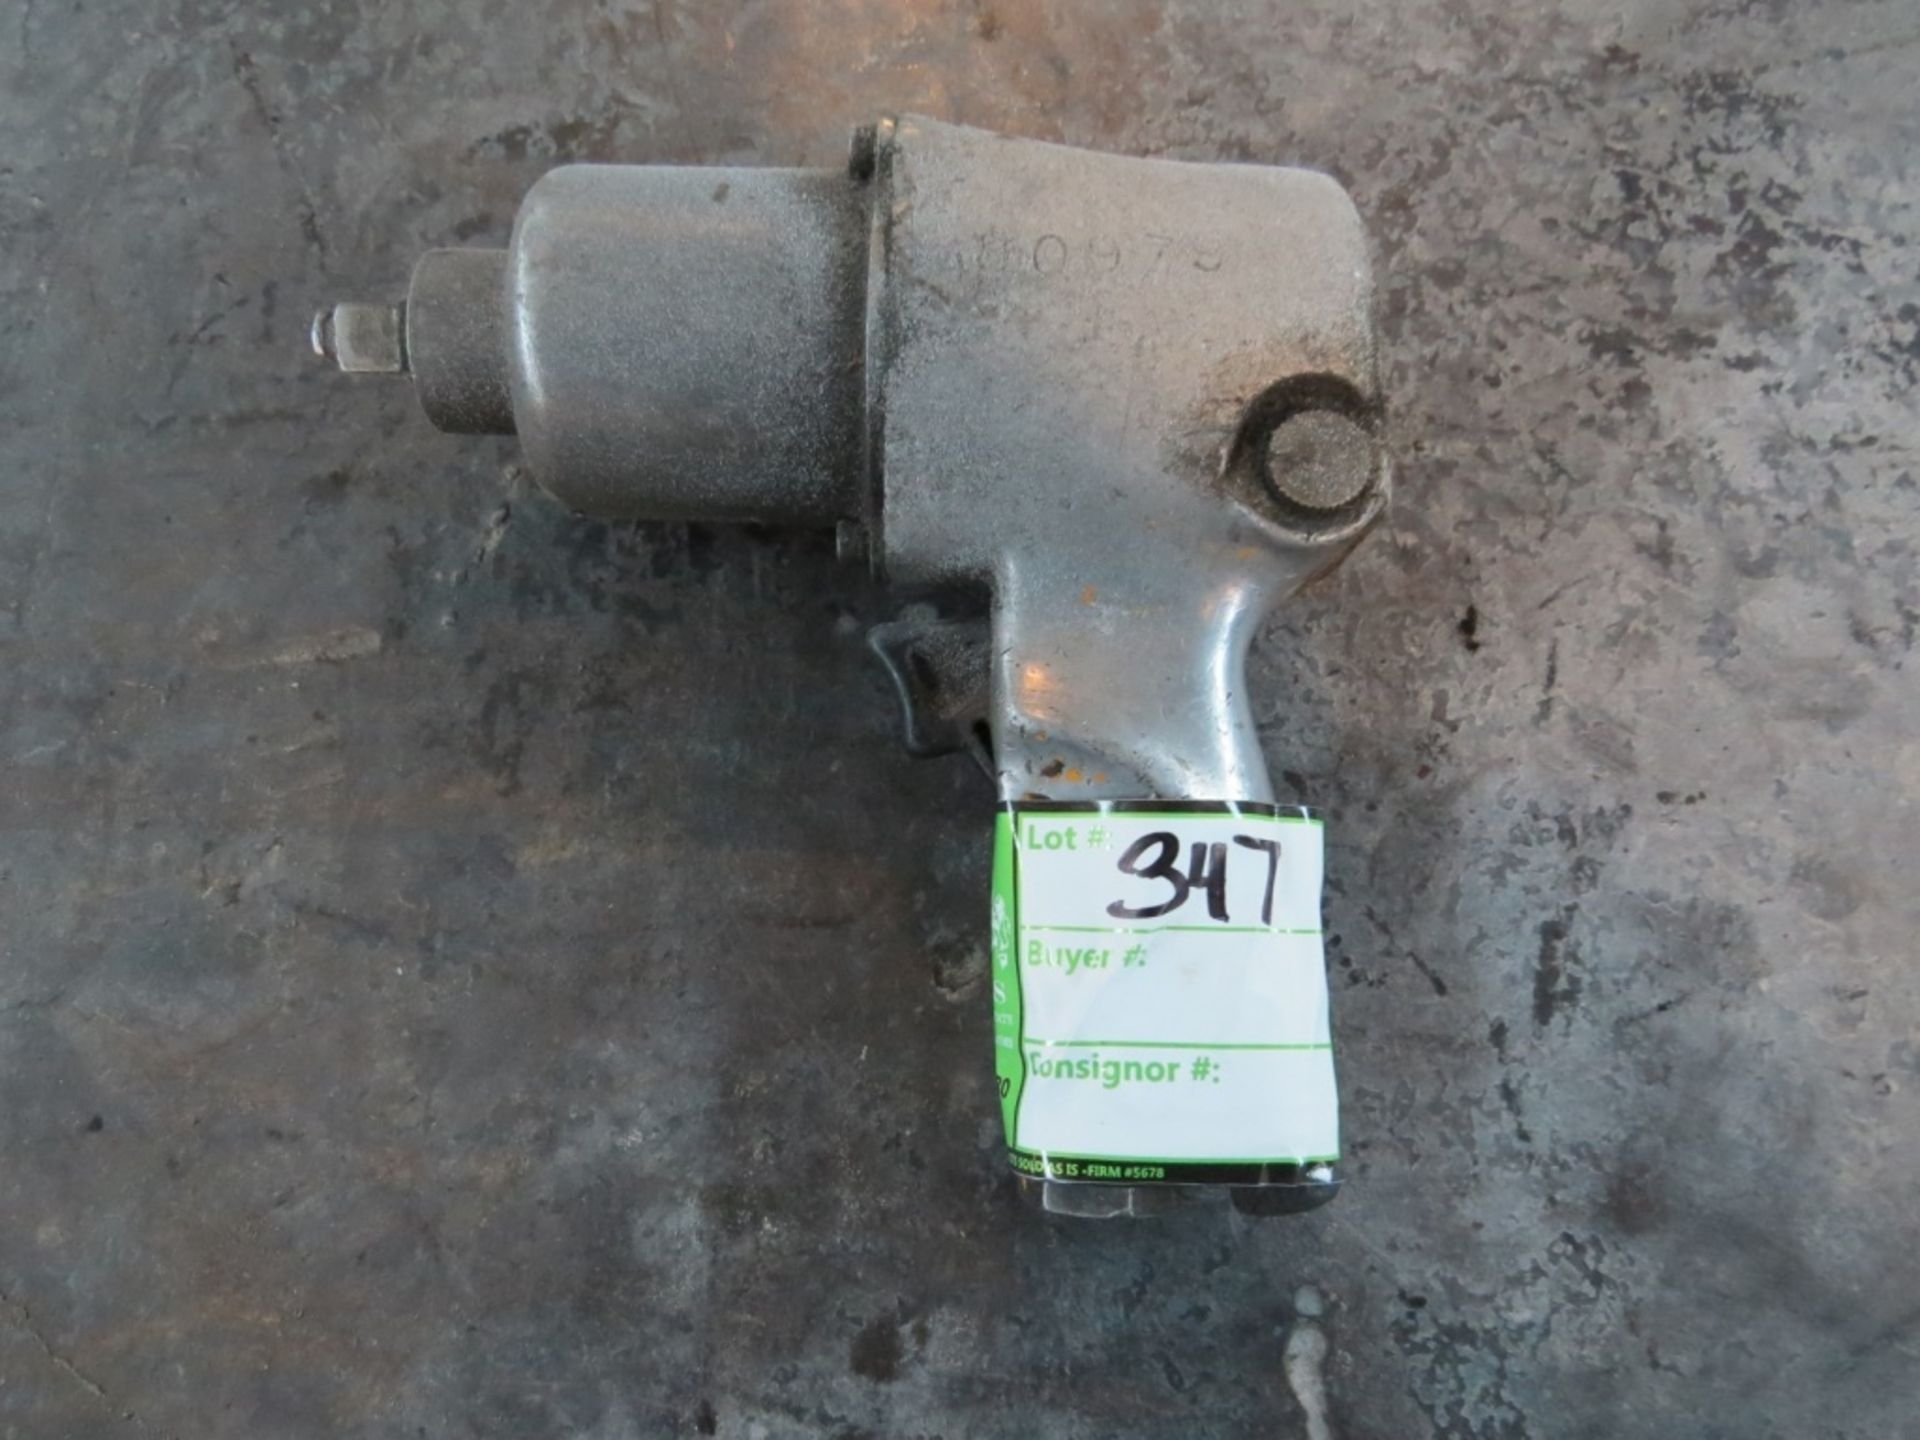 Unmarked 1/2" Pneumatic Impact-